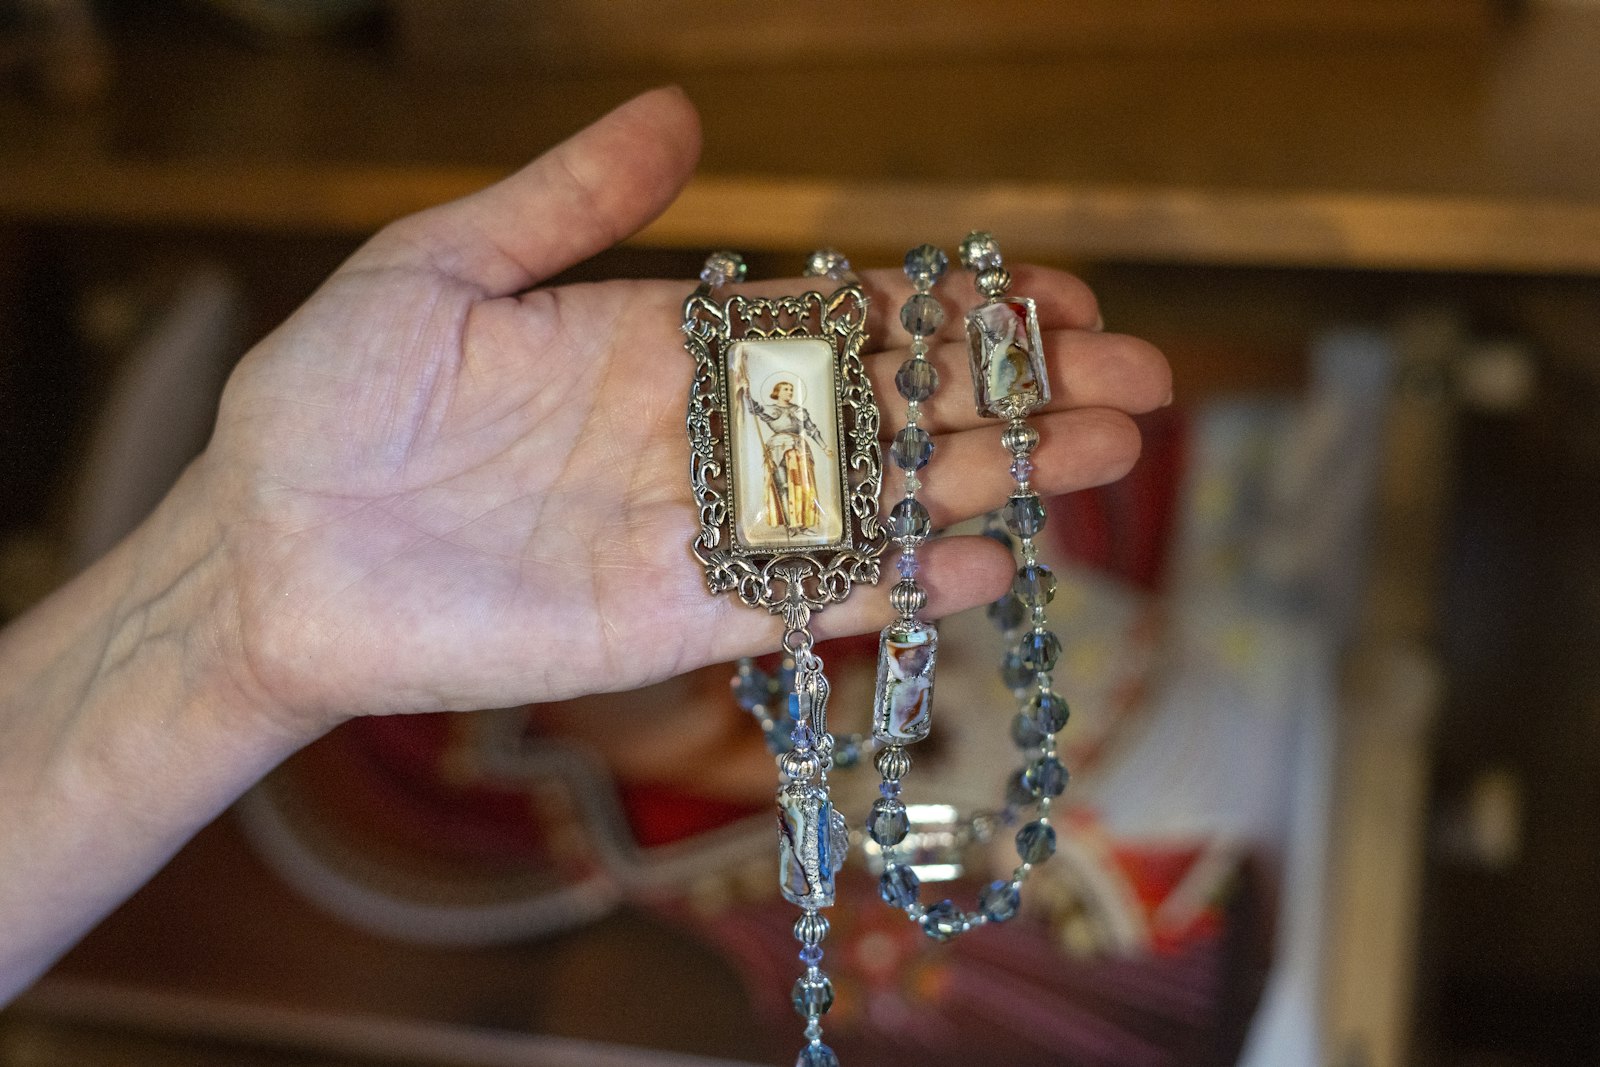 Quesada uses rare beads and chooses the images for each rosary with care before setting them with resin.